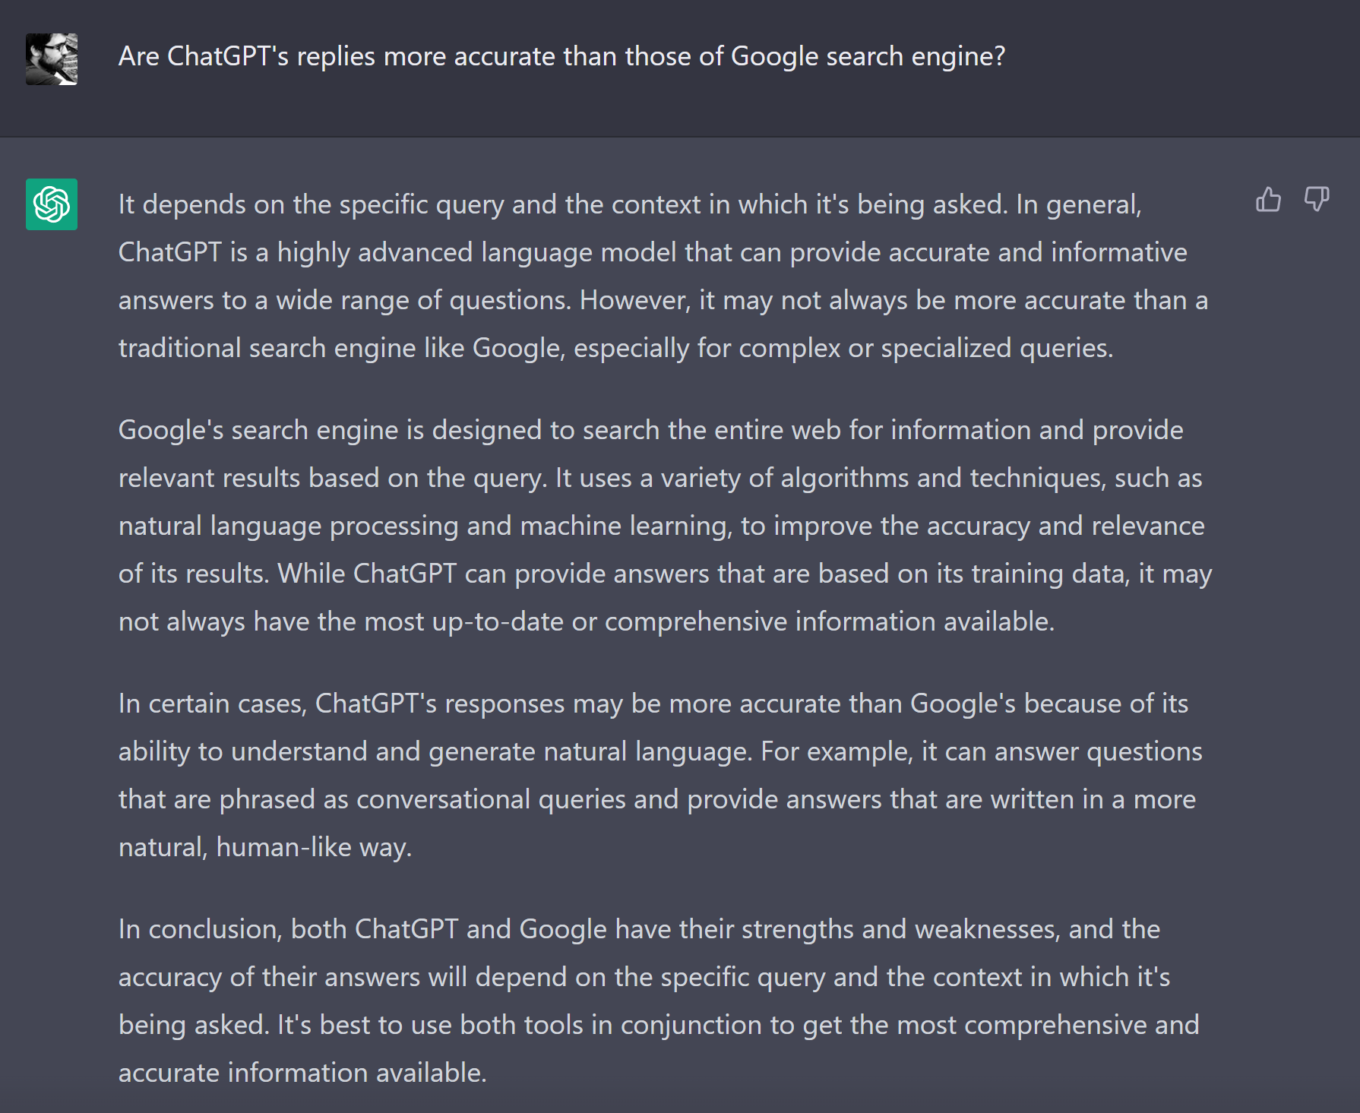 ChatGPT says that it is not always more accurate than Google